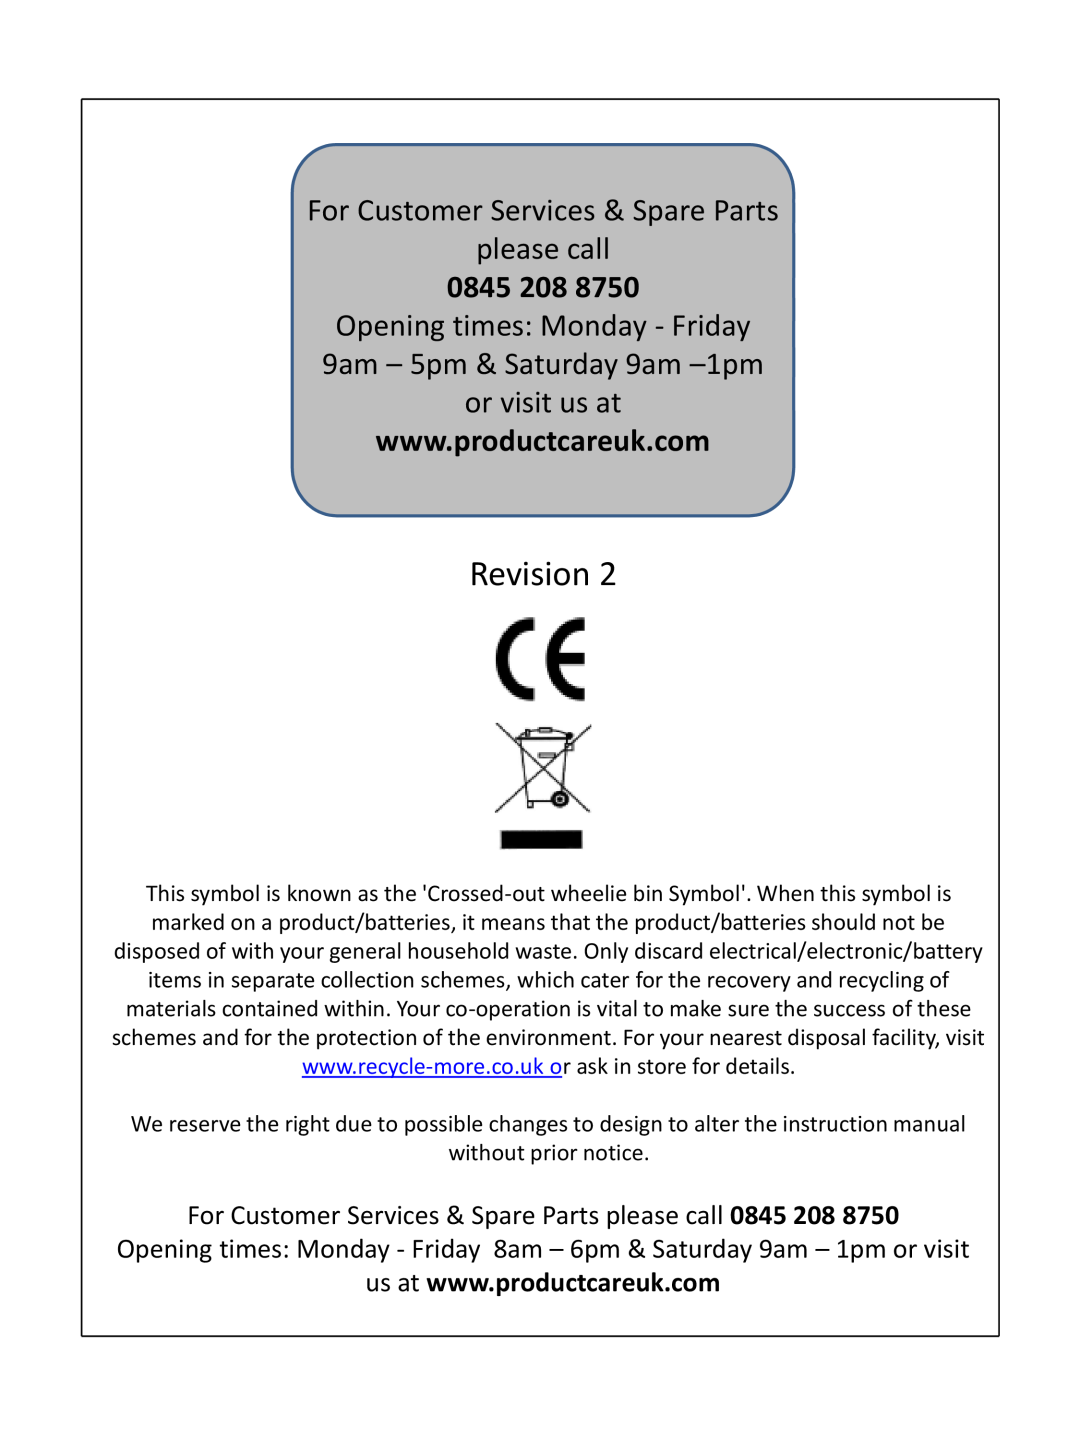 Russell Hobbs RHUCLF55(B) instruction manual Revision, For Customer Services & Spare Parts please call, 0845 